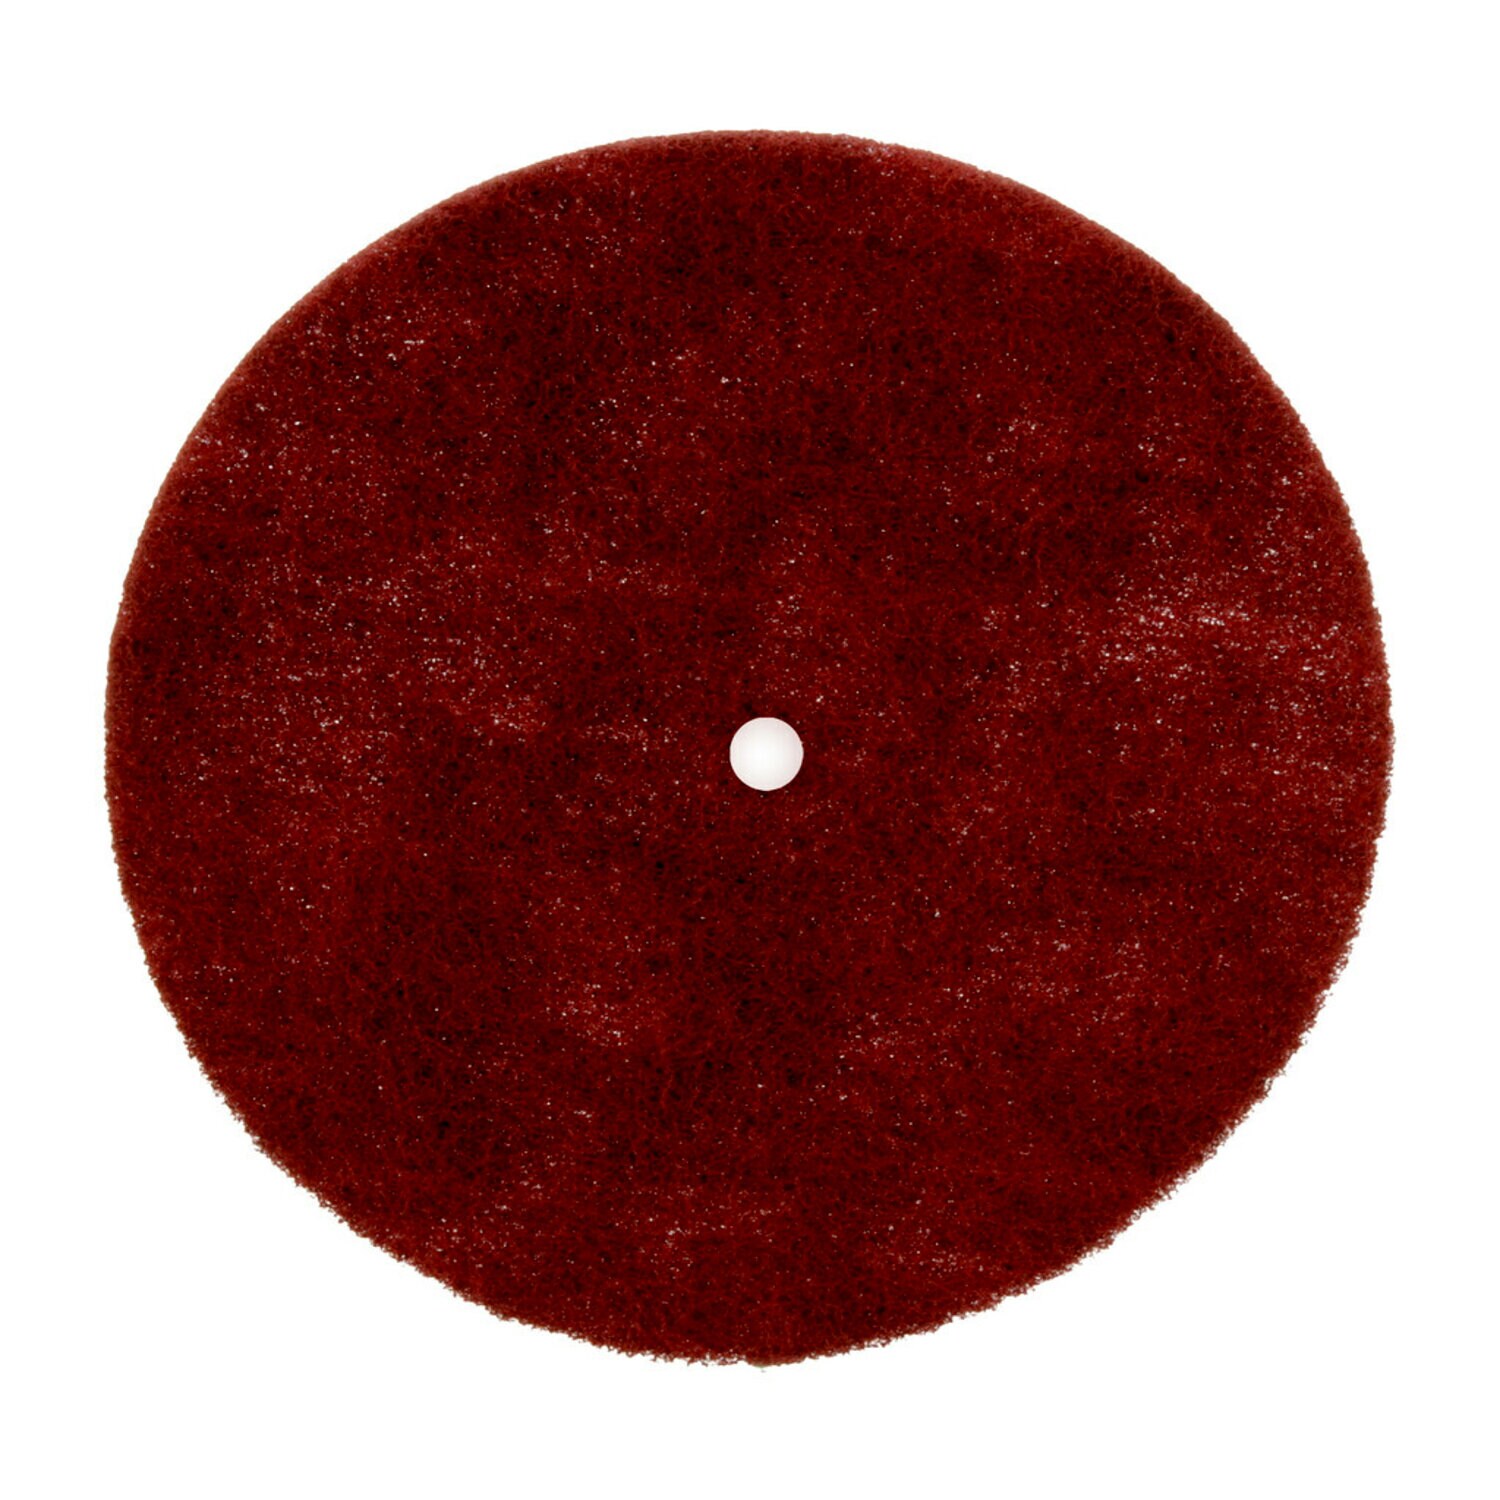 7010368541 - Standard Abrasives Buff and Blend HS Disc, 868128, 12 in x 1 in A VFN,
5 ea/Case